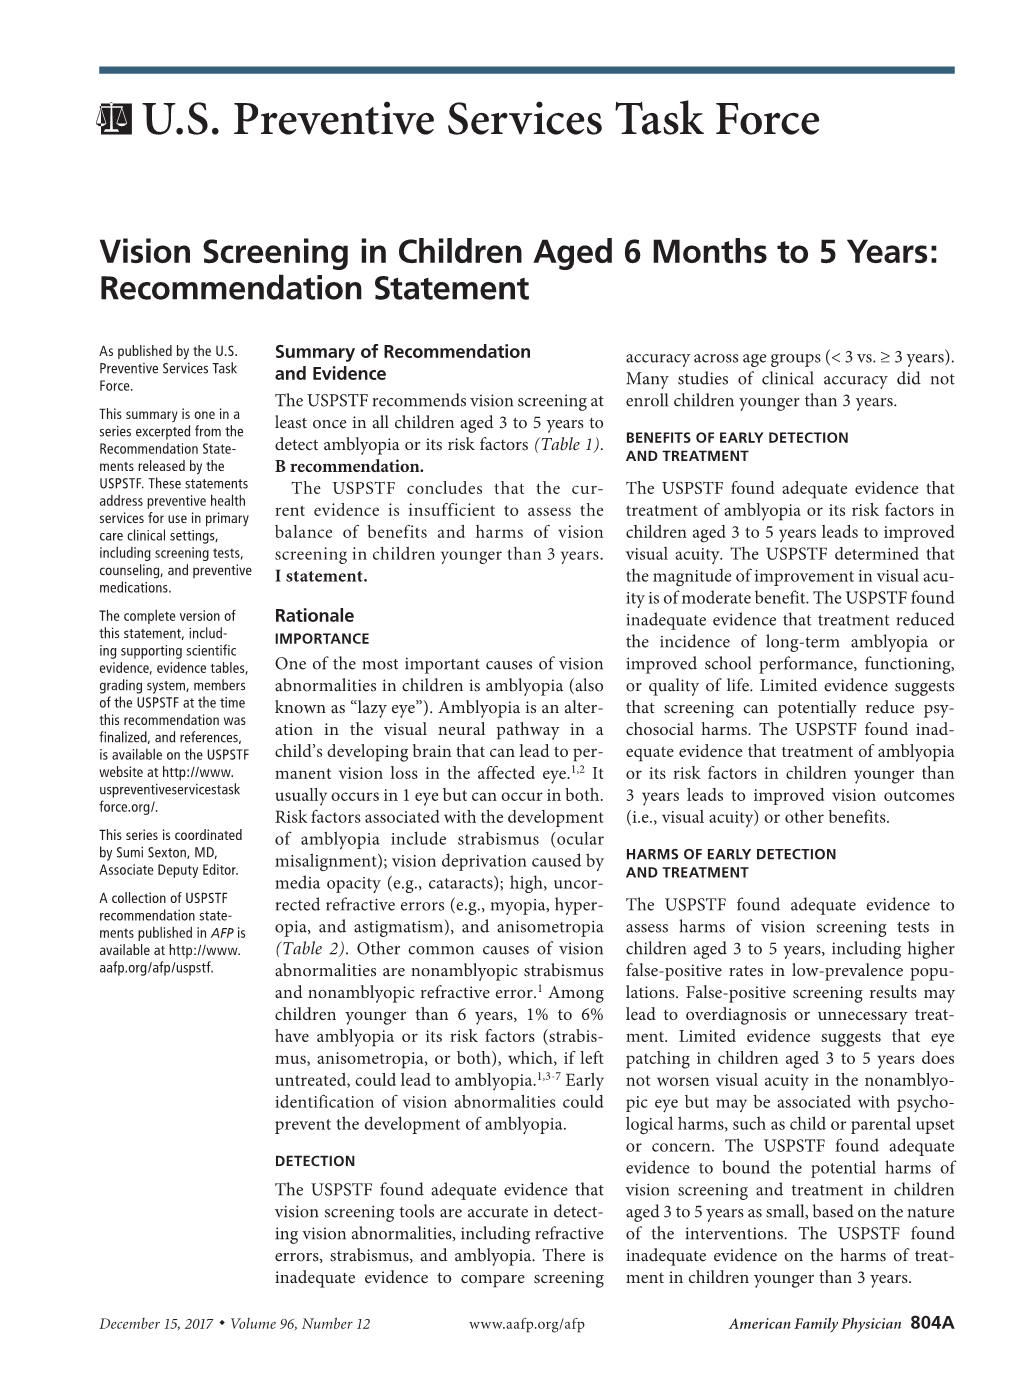 Vision Screening in Children Aged 6 Months to 5 Years: Recommendation Statement